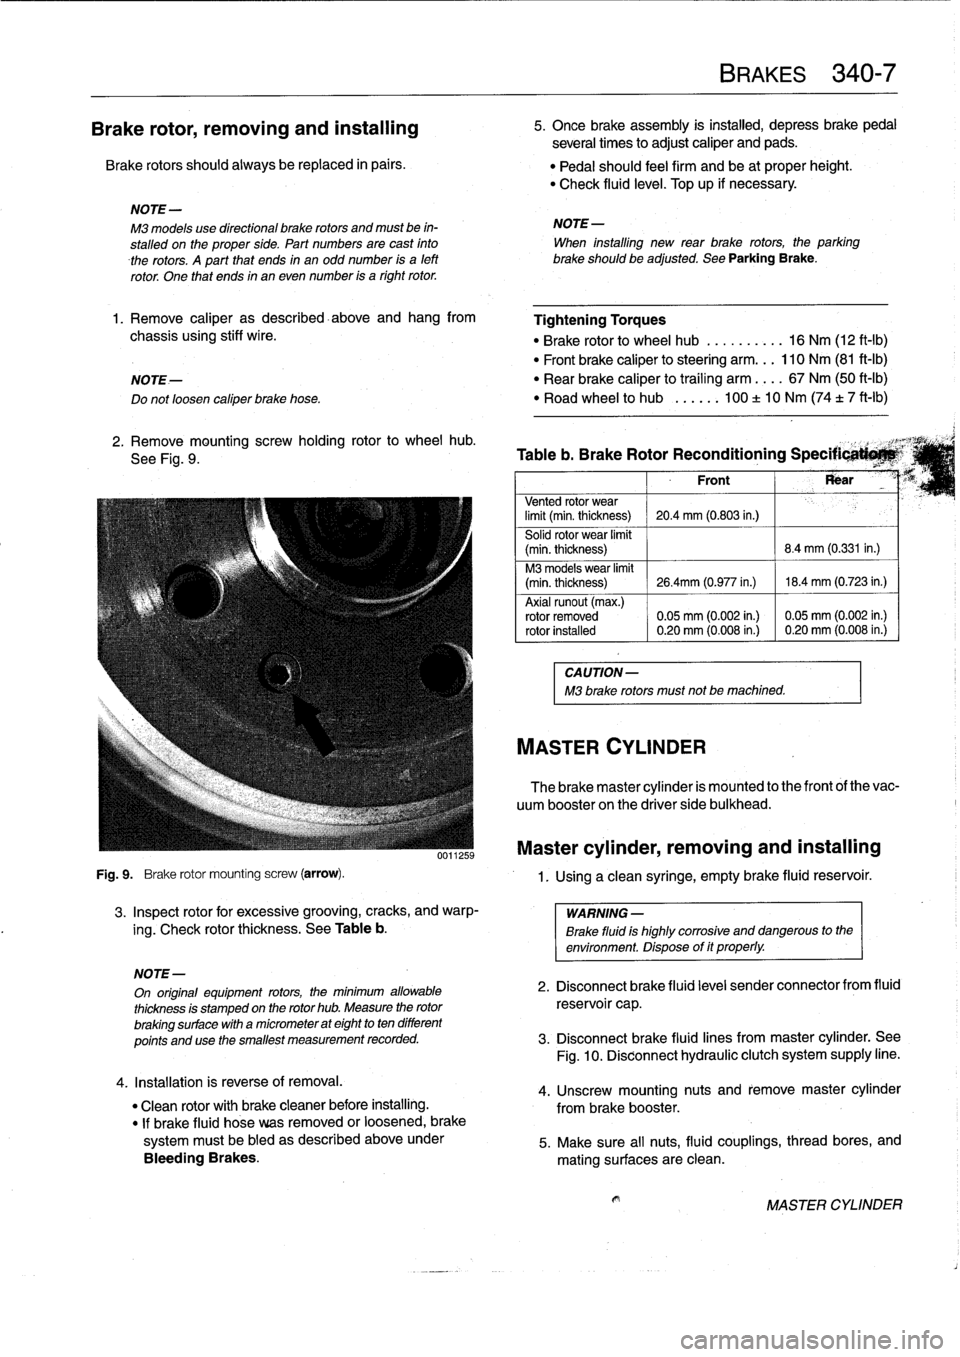 BMW 328i 1998 E36 Workshop Manual 
Brake
rotor,
removing
and
installing

Brake
rotors
shouldalways
be
replaced
in
pairs
.

Fig
.
9
.

	

Brake
rotor
mounting
screw
(arrow)
.

3
.
Inspect
rotor
for
excessive
grooving,
cracks,
and
warp-